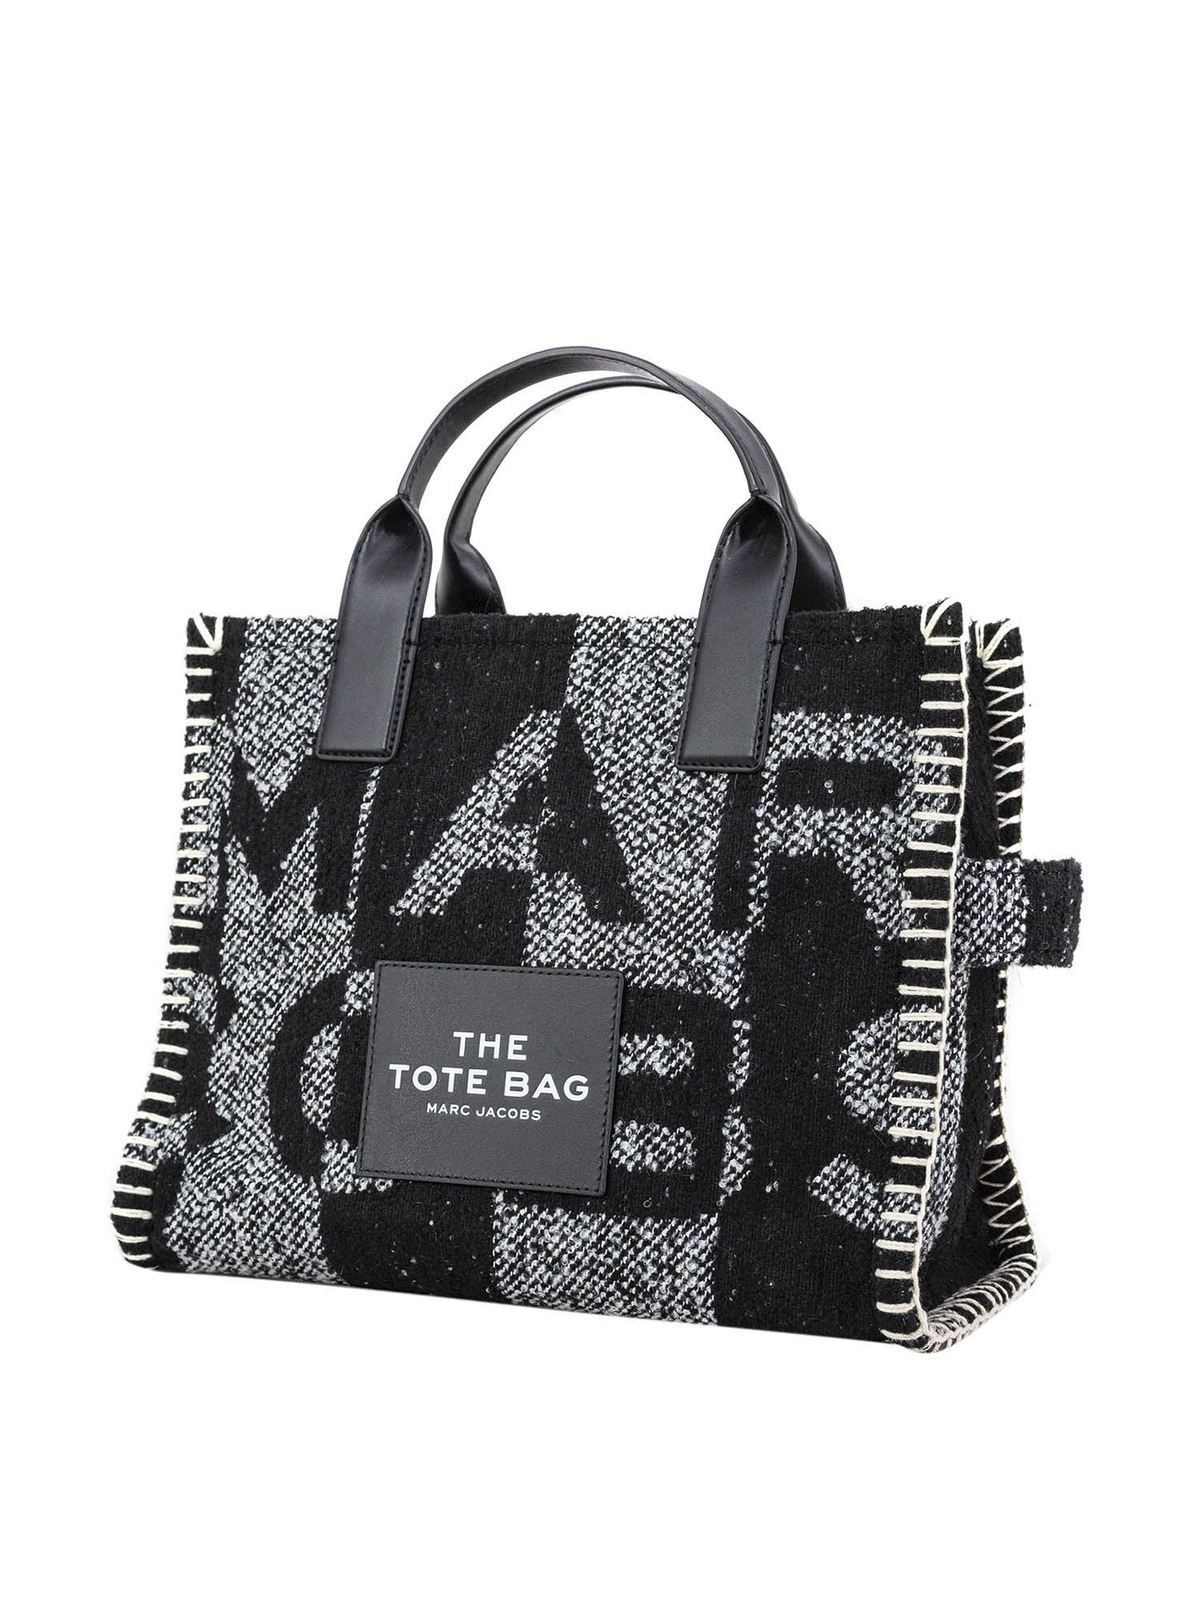 Totes bags Marc Jacobs - The Blanket Traveller bag in black and white -  M0016741001